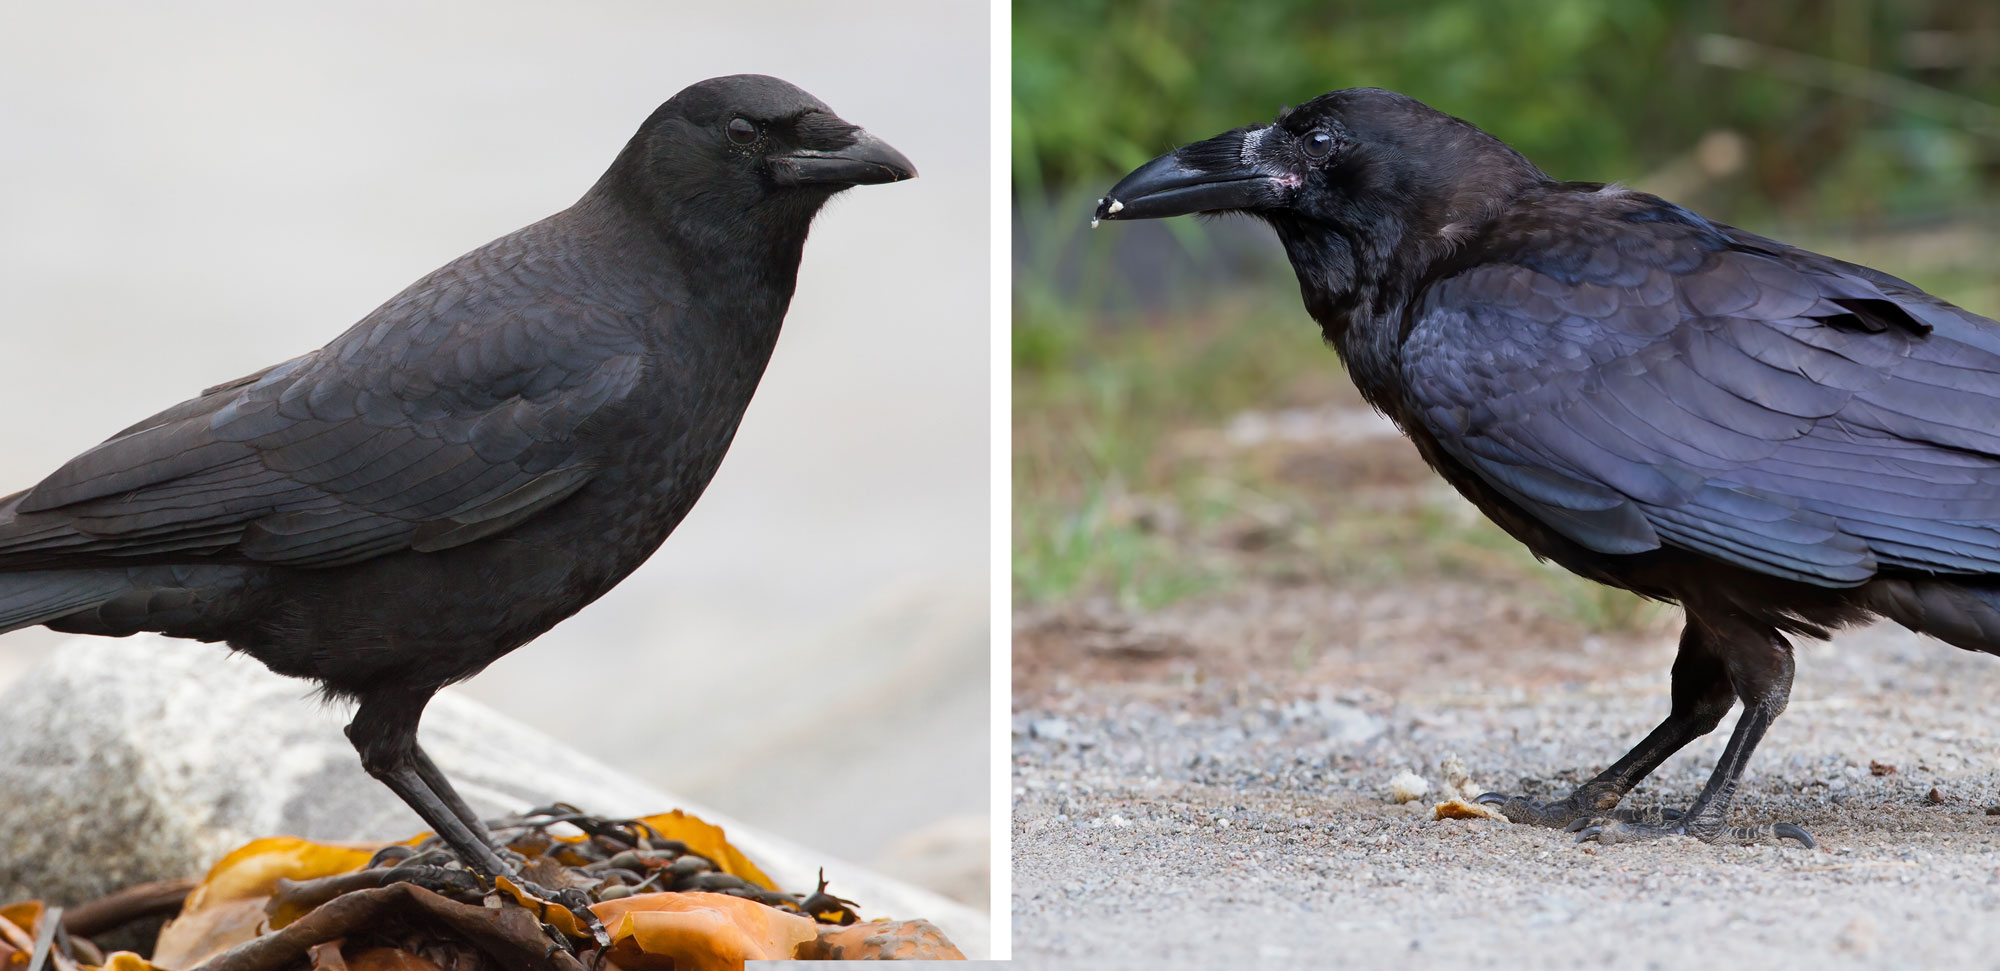 A crow and a raven side by side.